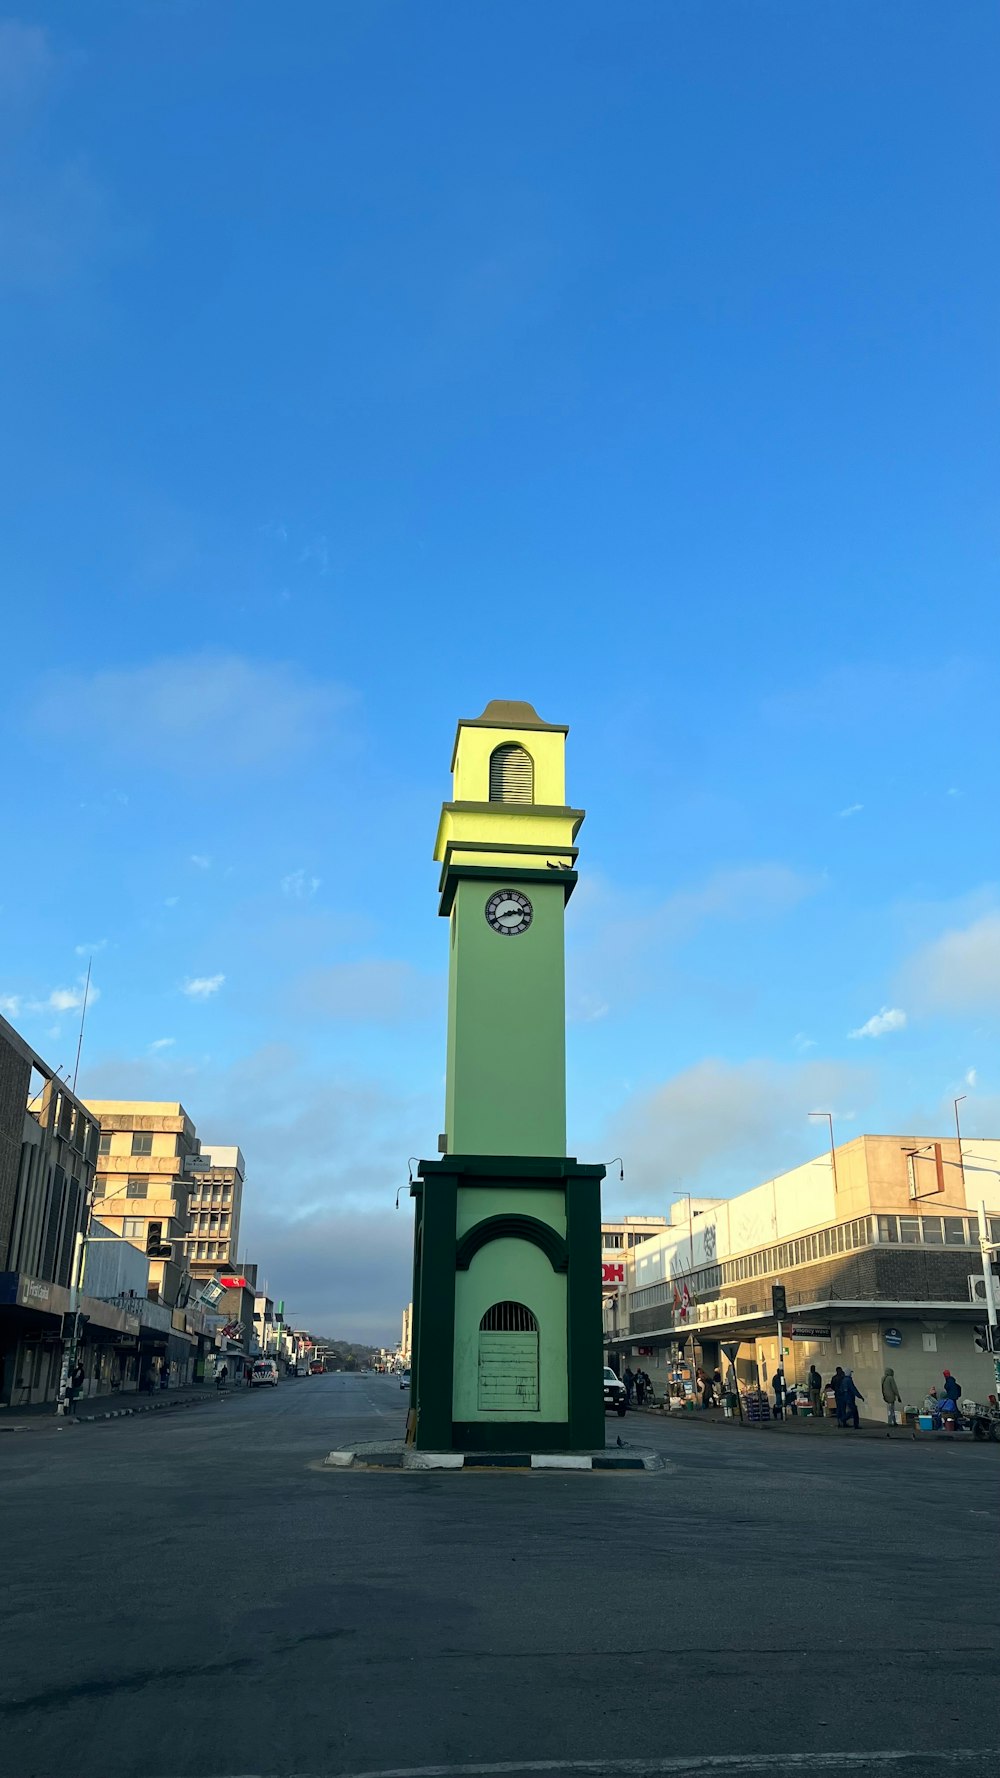 a green and yellow clock tower in the middle of a street